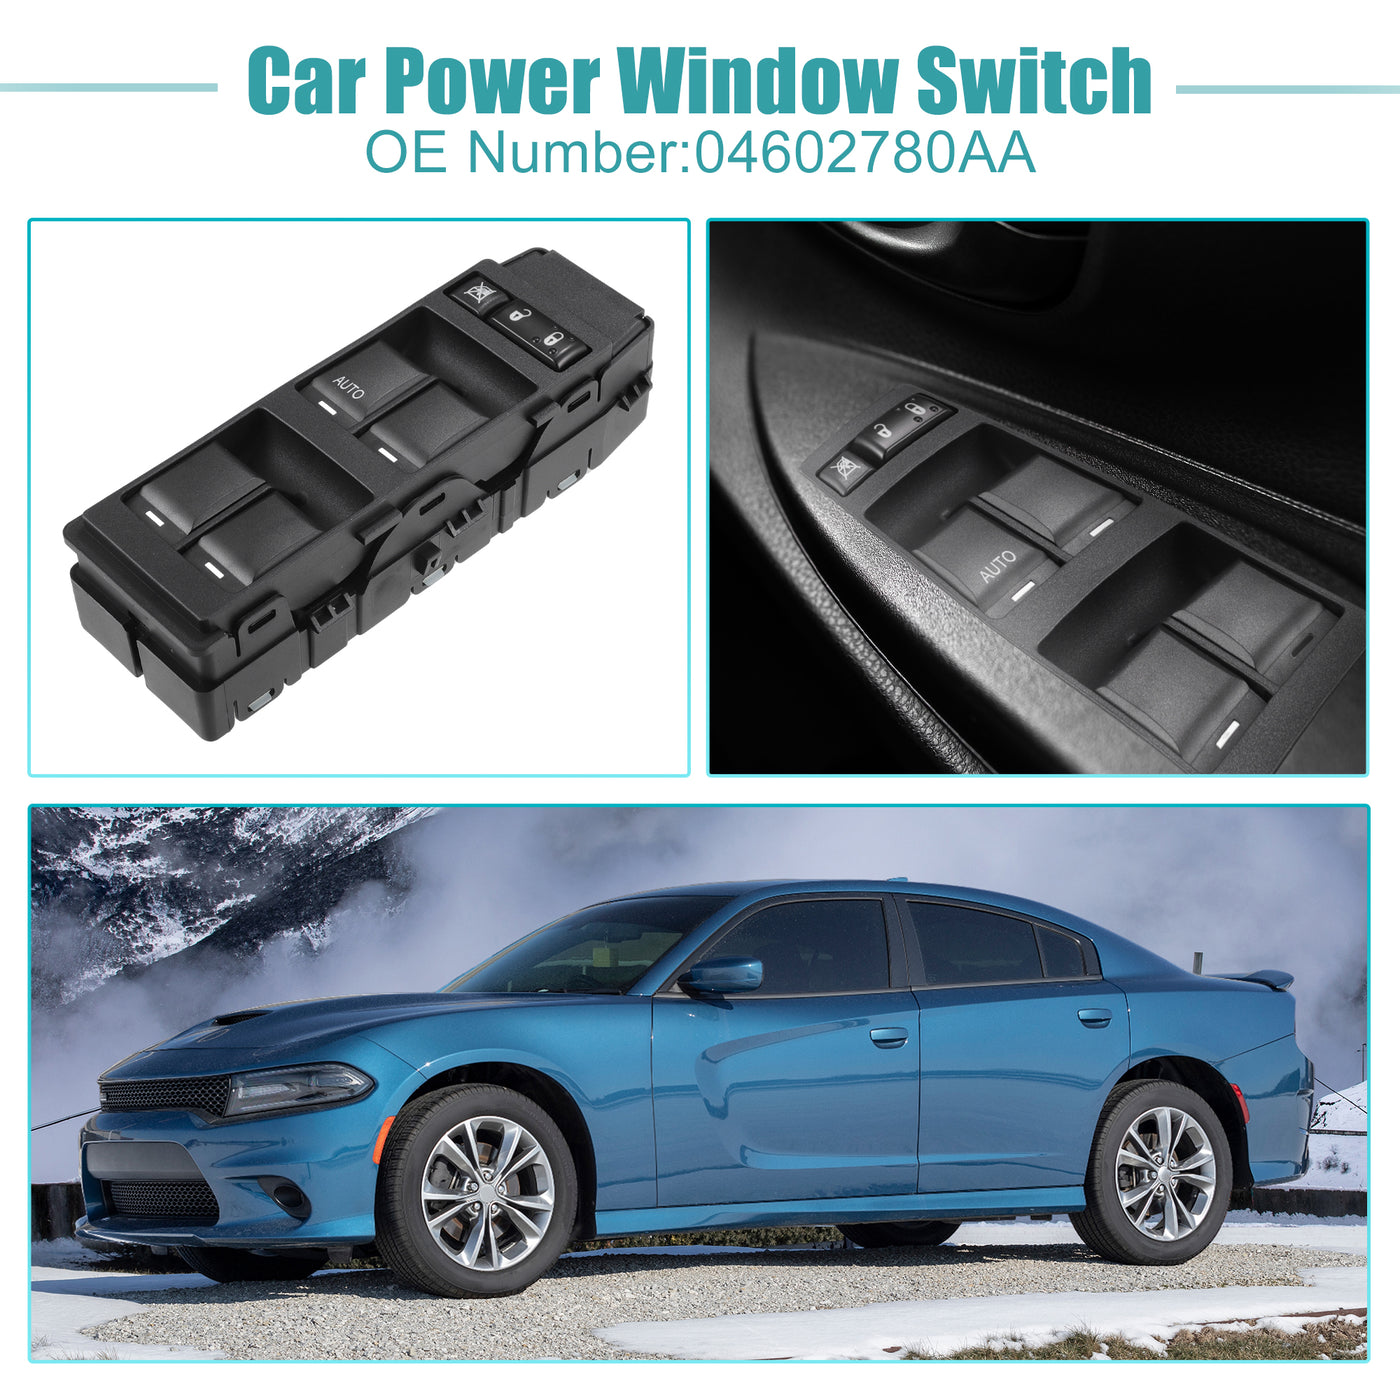 ACROPIX Power Window Switch Window Control Switch Fit for Chrysler 200 300 Sebring No.04602780AA - Pack of 1